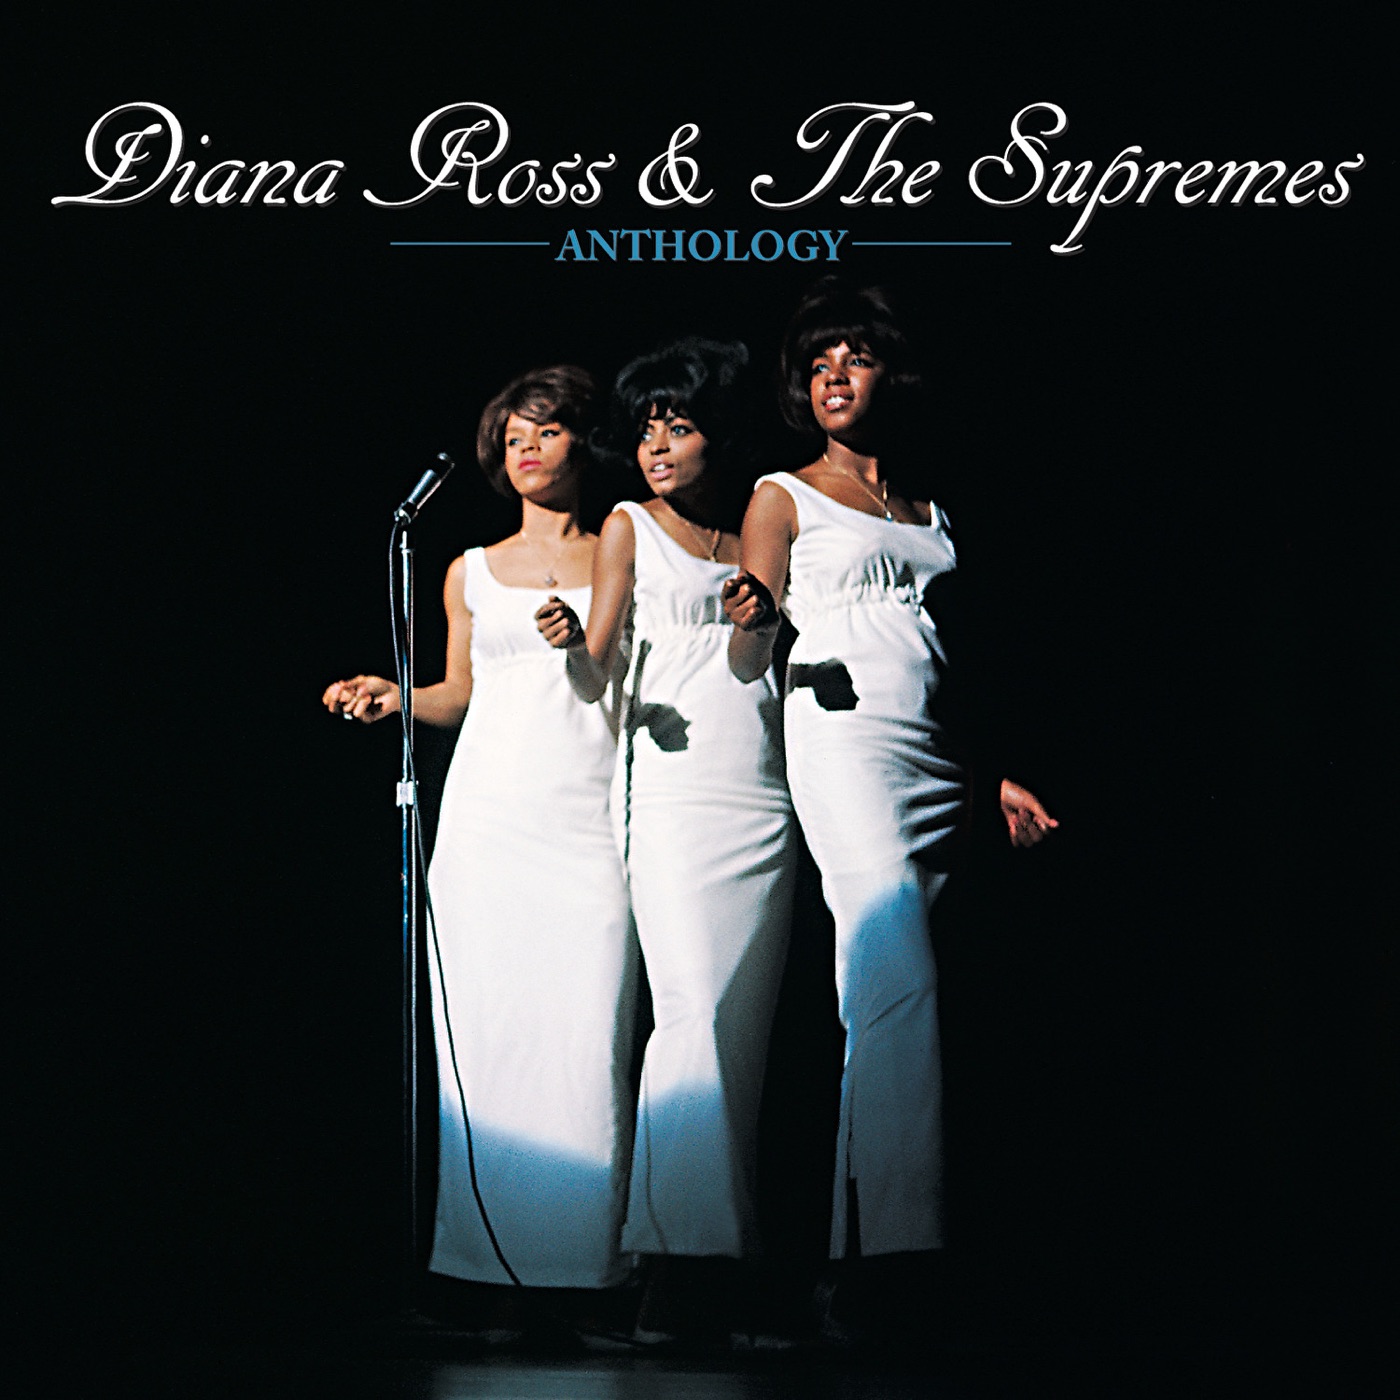 Anthology by Diana Ross & The Supremes, The Supremes